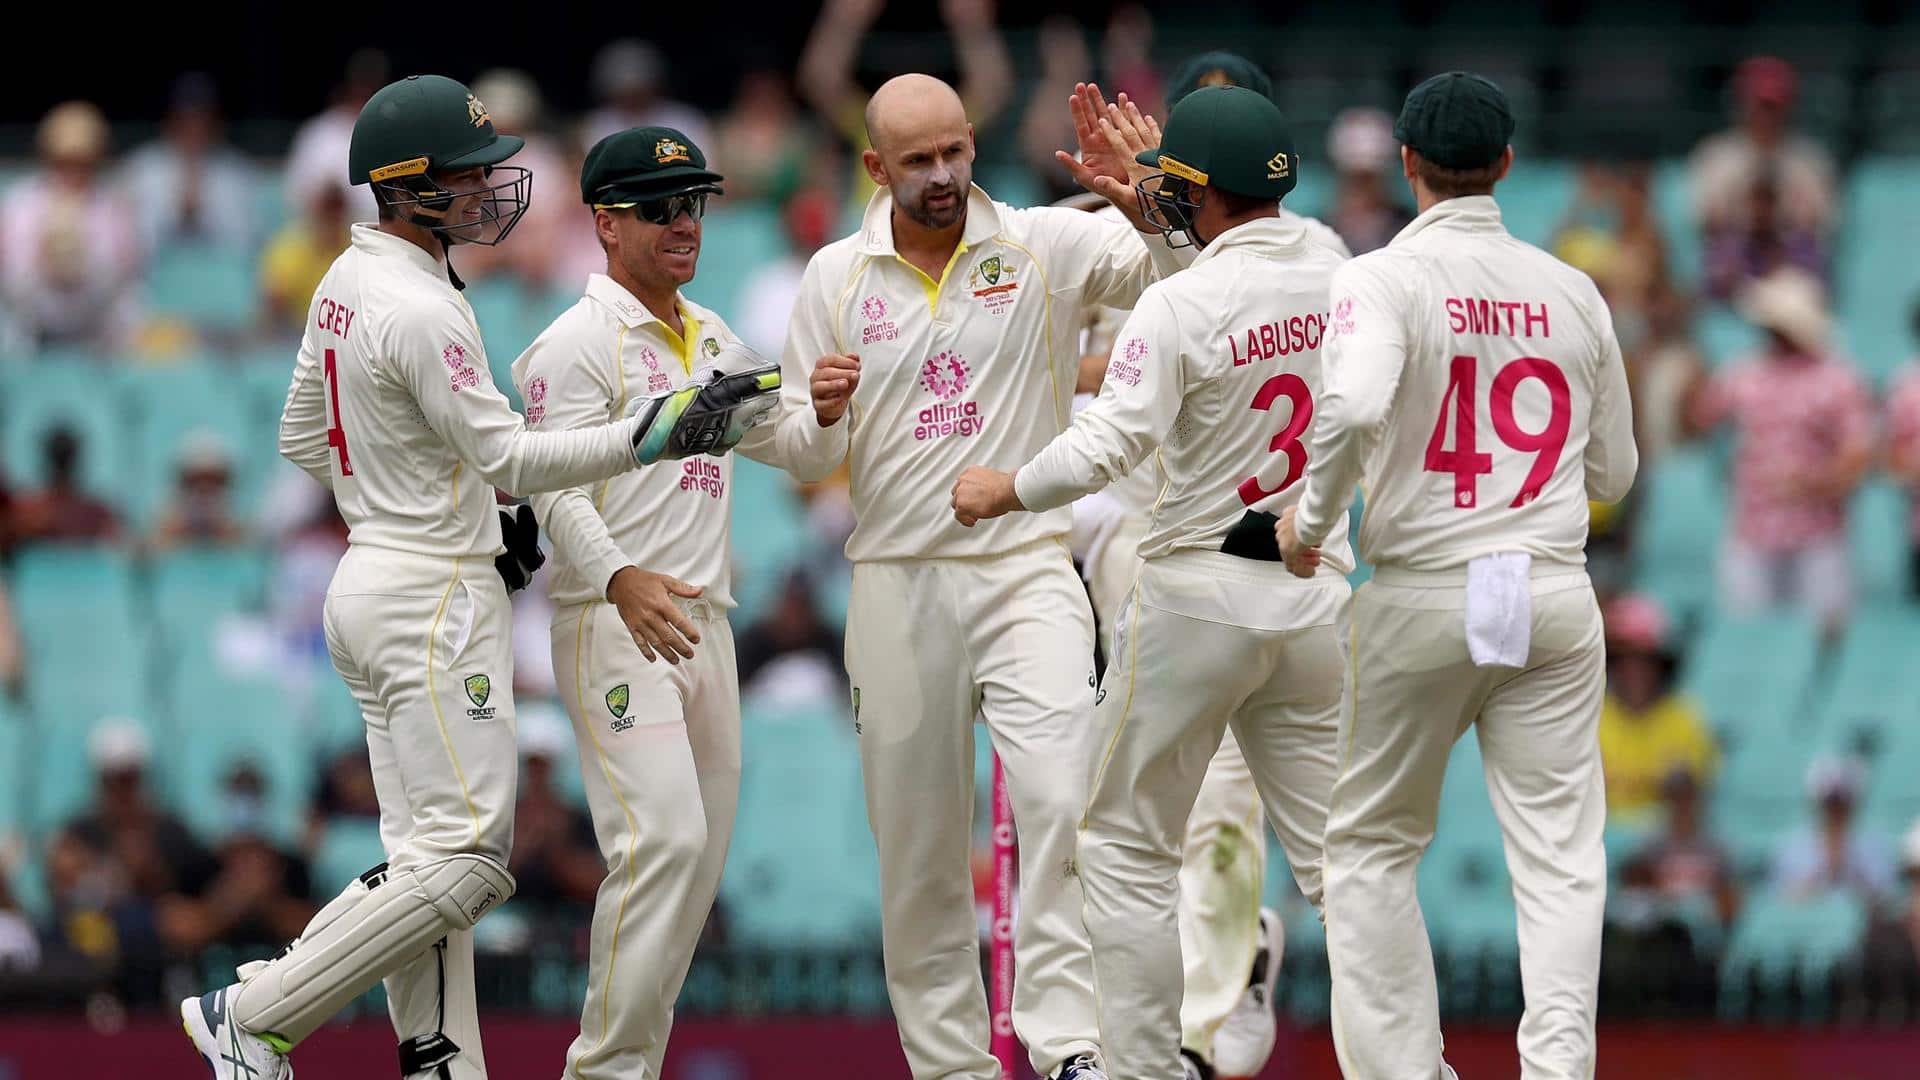 Australia vs West Indies, Tests: Here is the statistical preview